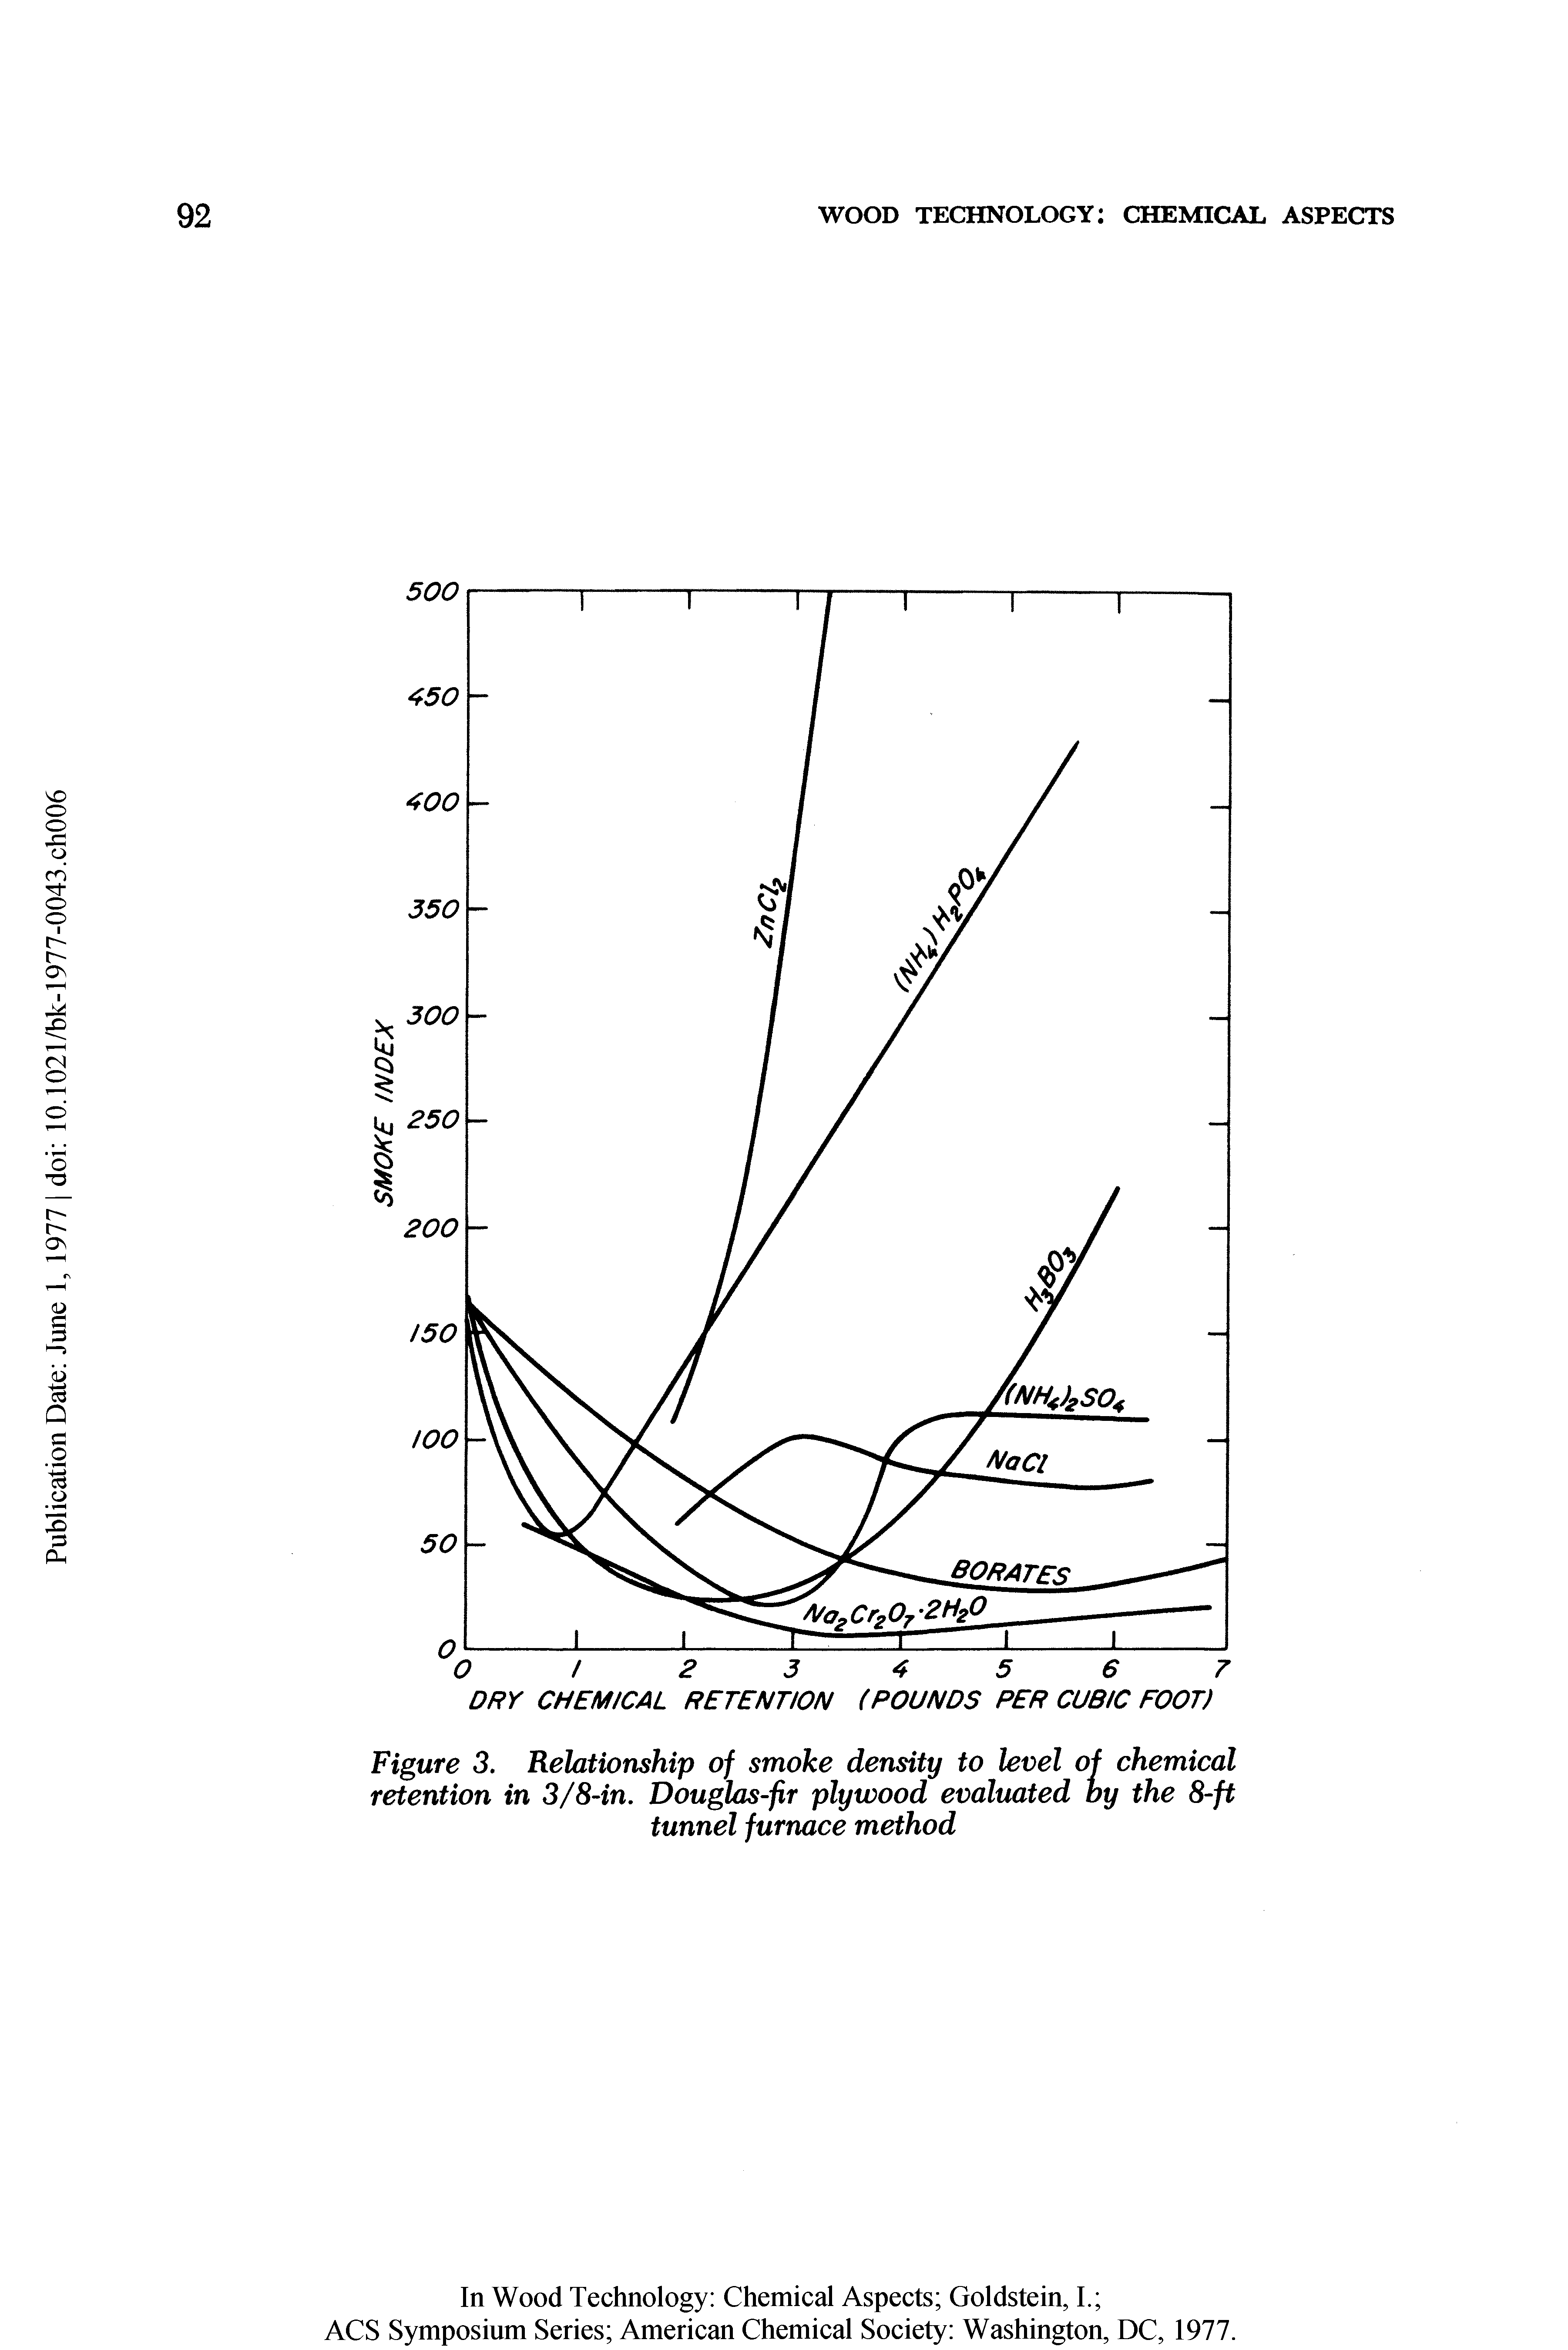 Figure 3. Relationship of smoke density to level of chemical retention in 3/8-in. Douglas-fir plywood evaluated by the 8-ft tunnel furnace method...